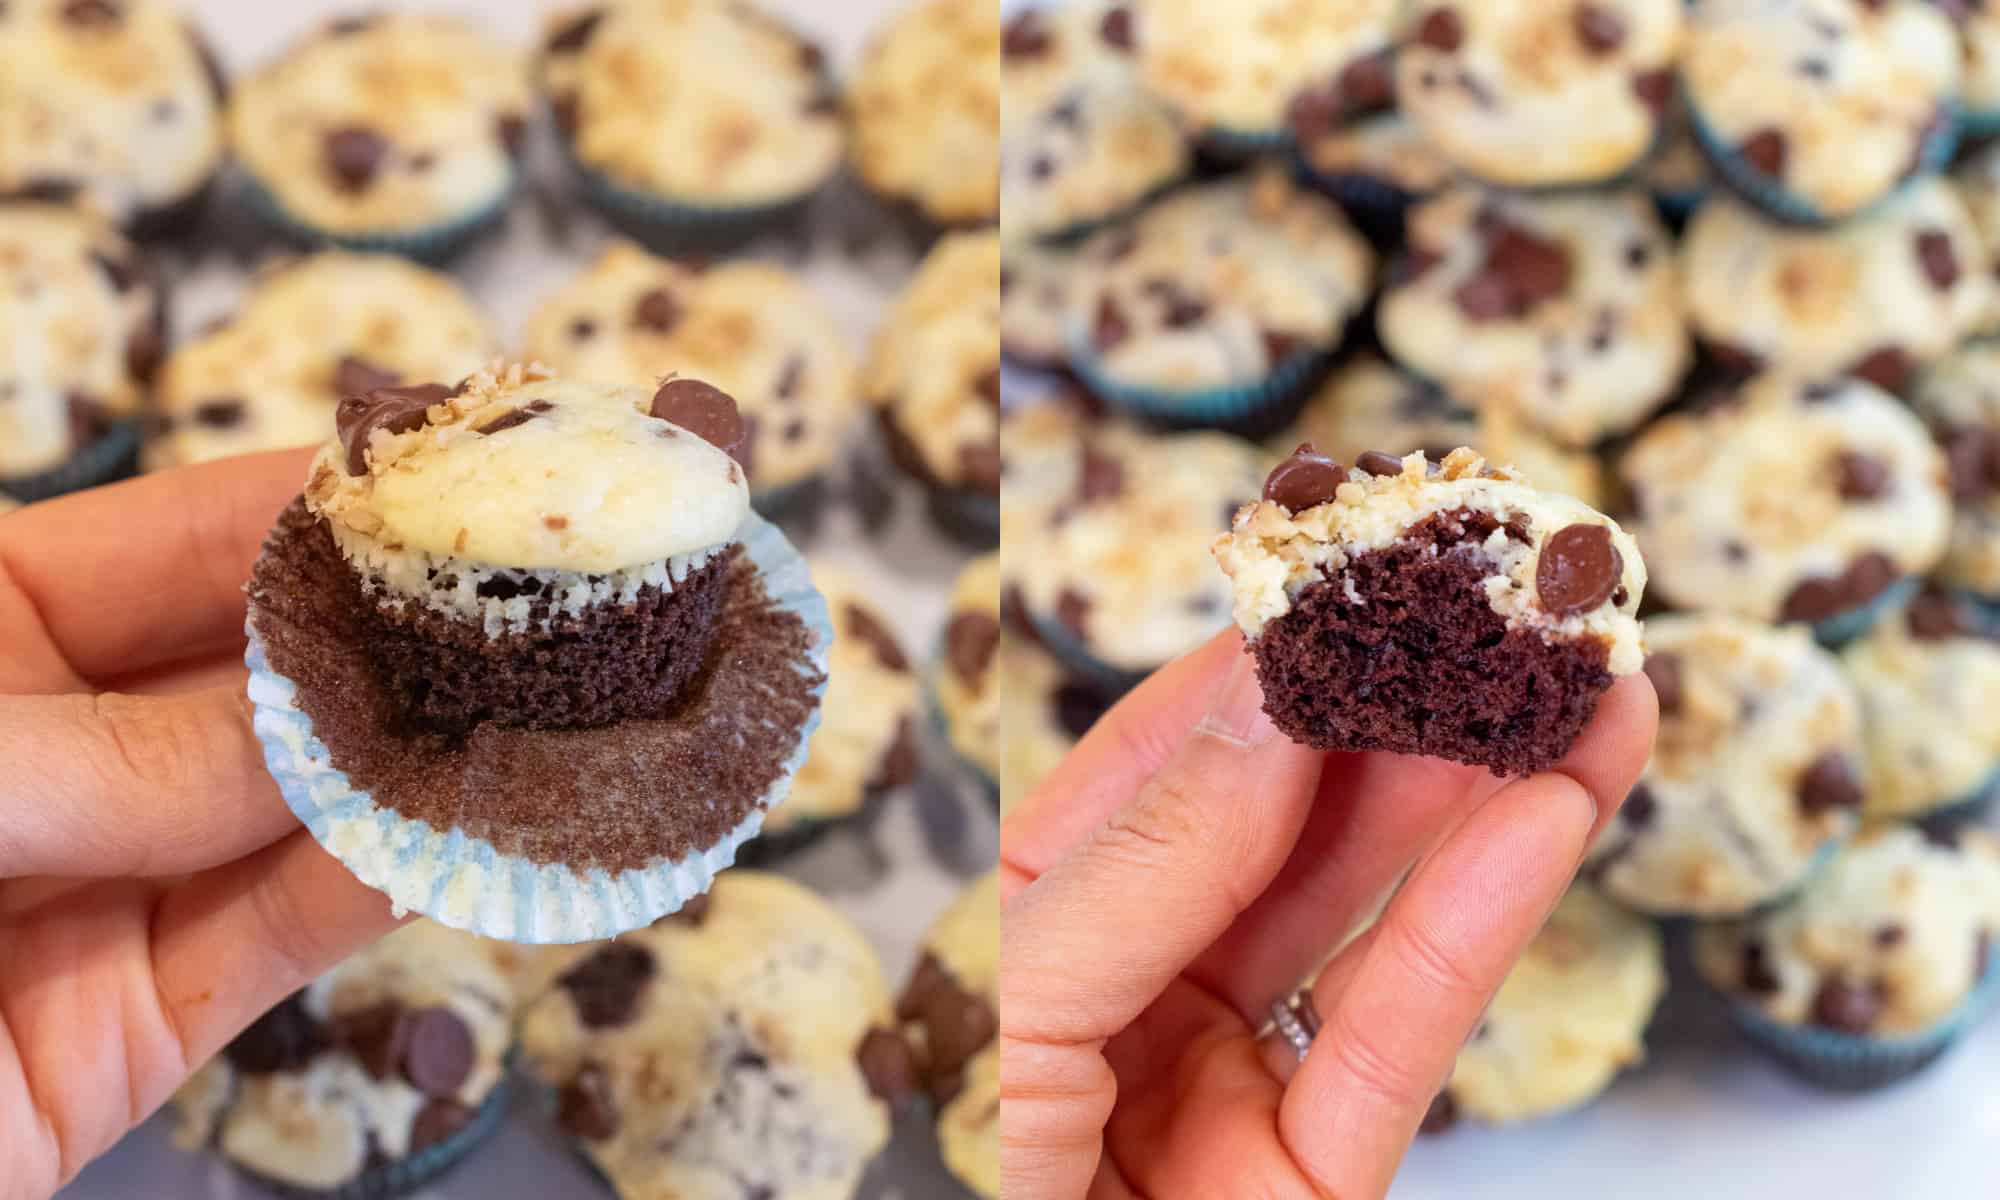 a hand holding a mini chocolate cupcake with cream cheese topping. and a hand holding a mini chocolate cupcake with cream cheese topping with a bite taken out.